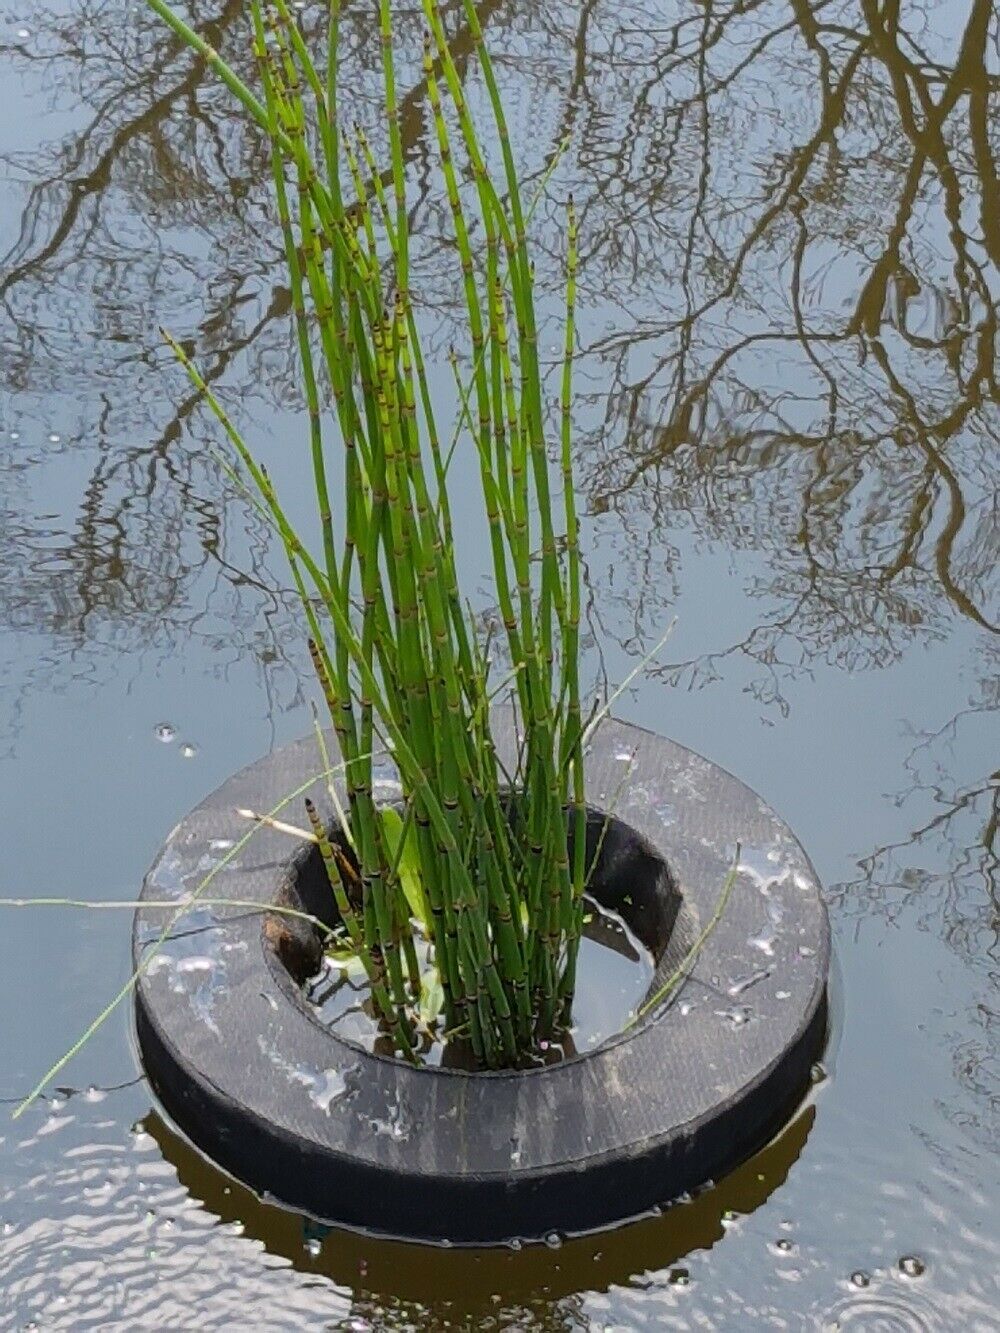 Pond Planters Ultimate Aquatic Water Garden Pond Plant Kit for Small Ponds